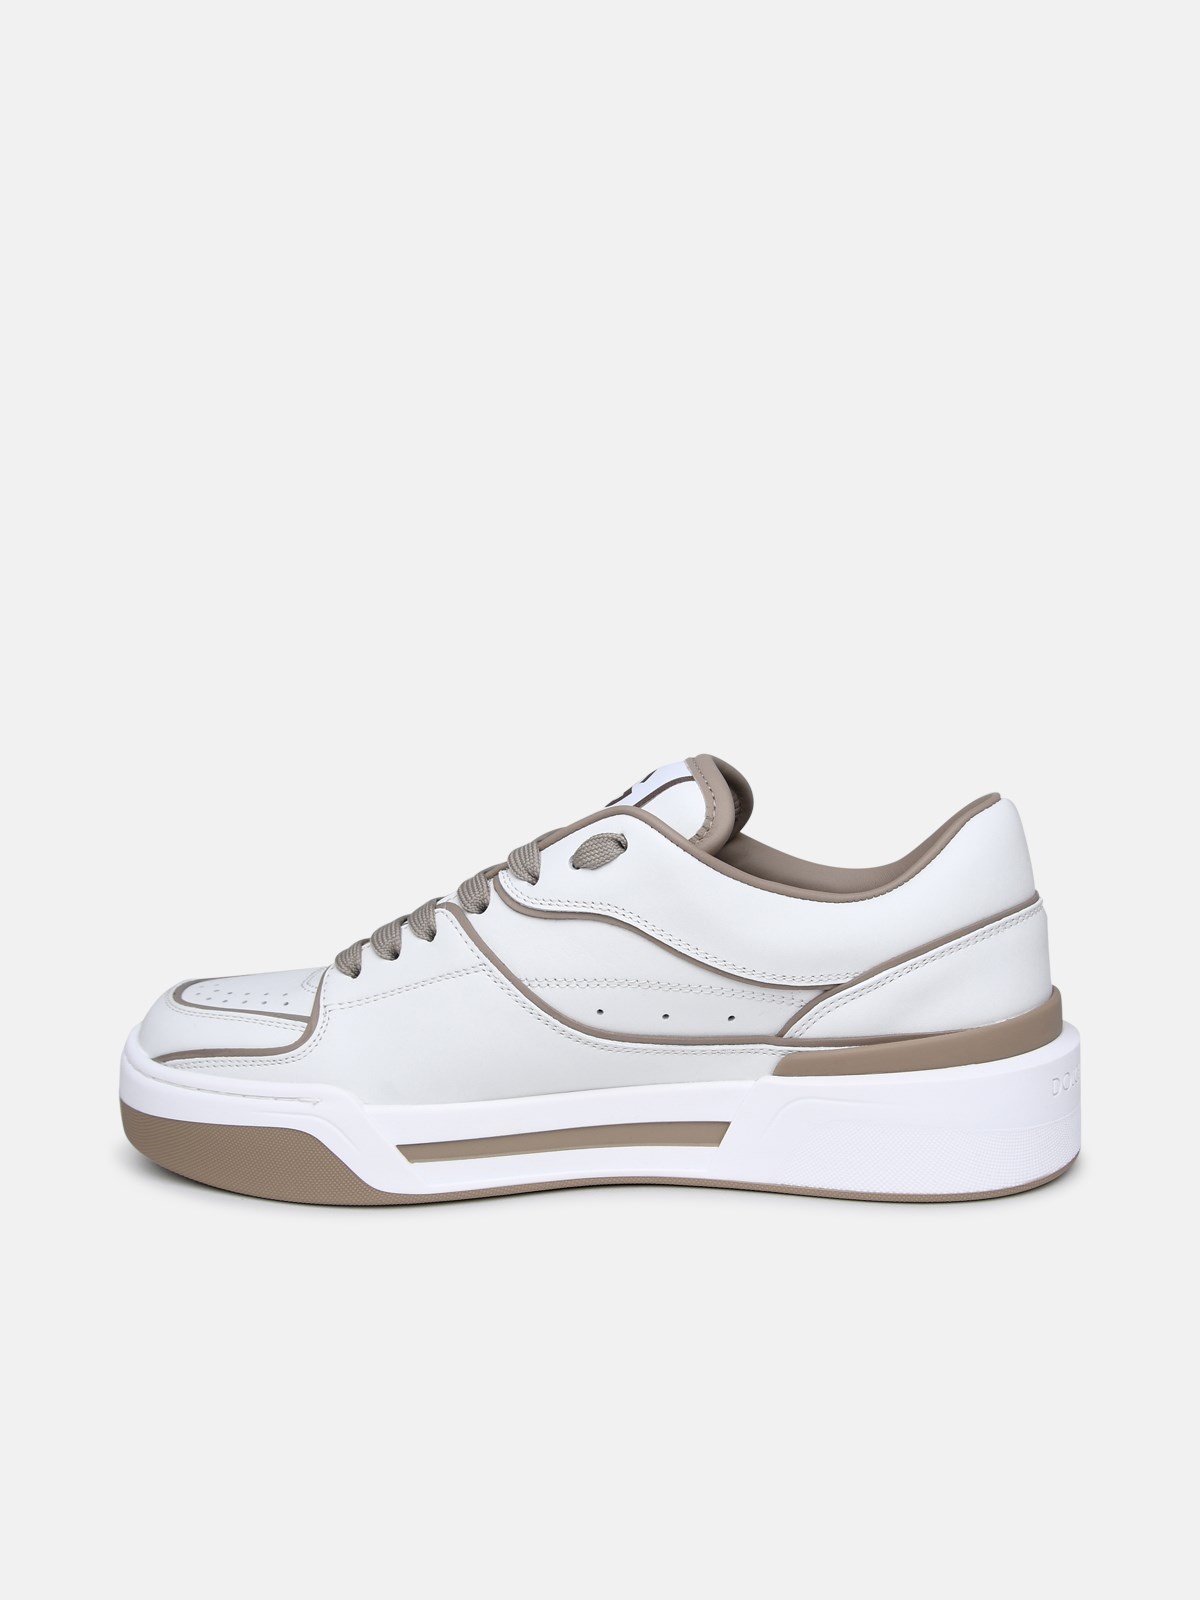 New Roma white leather sneakers - 3